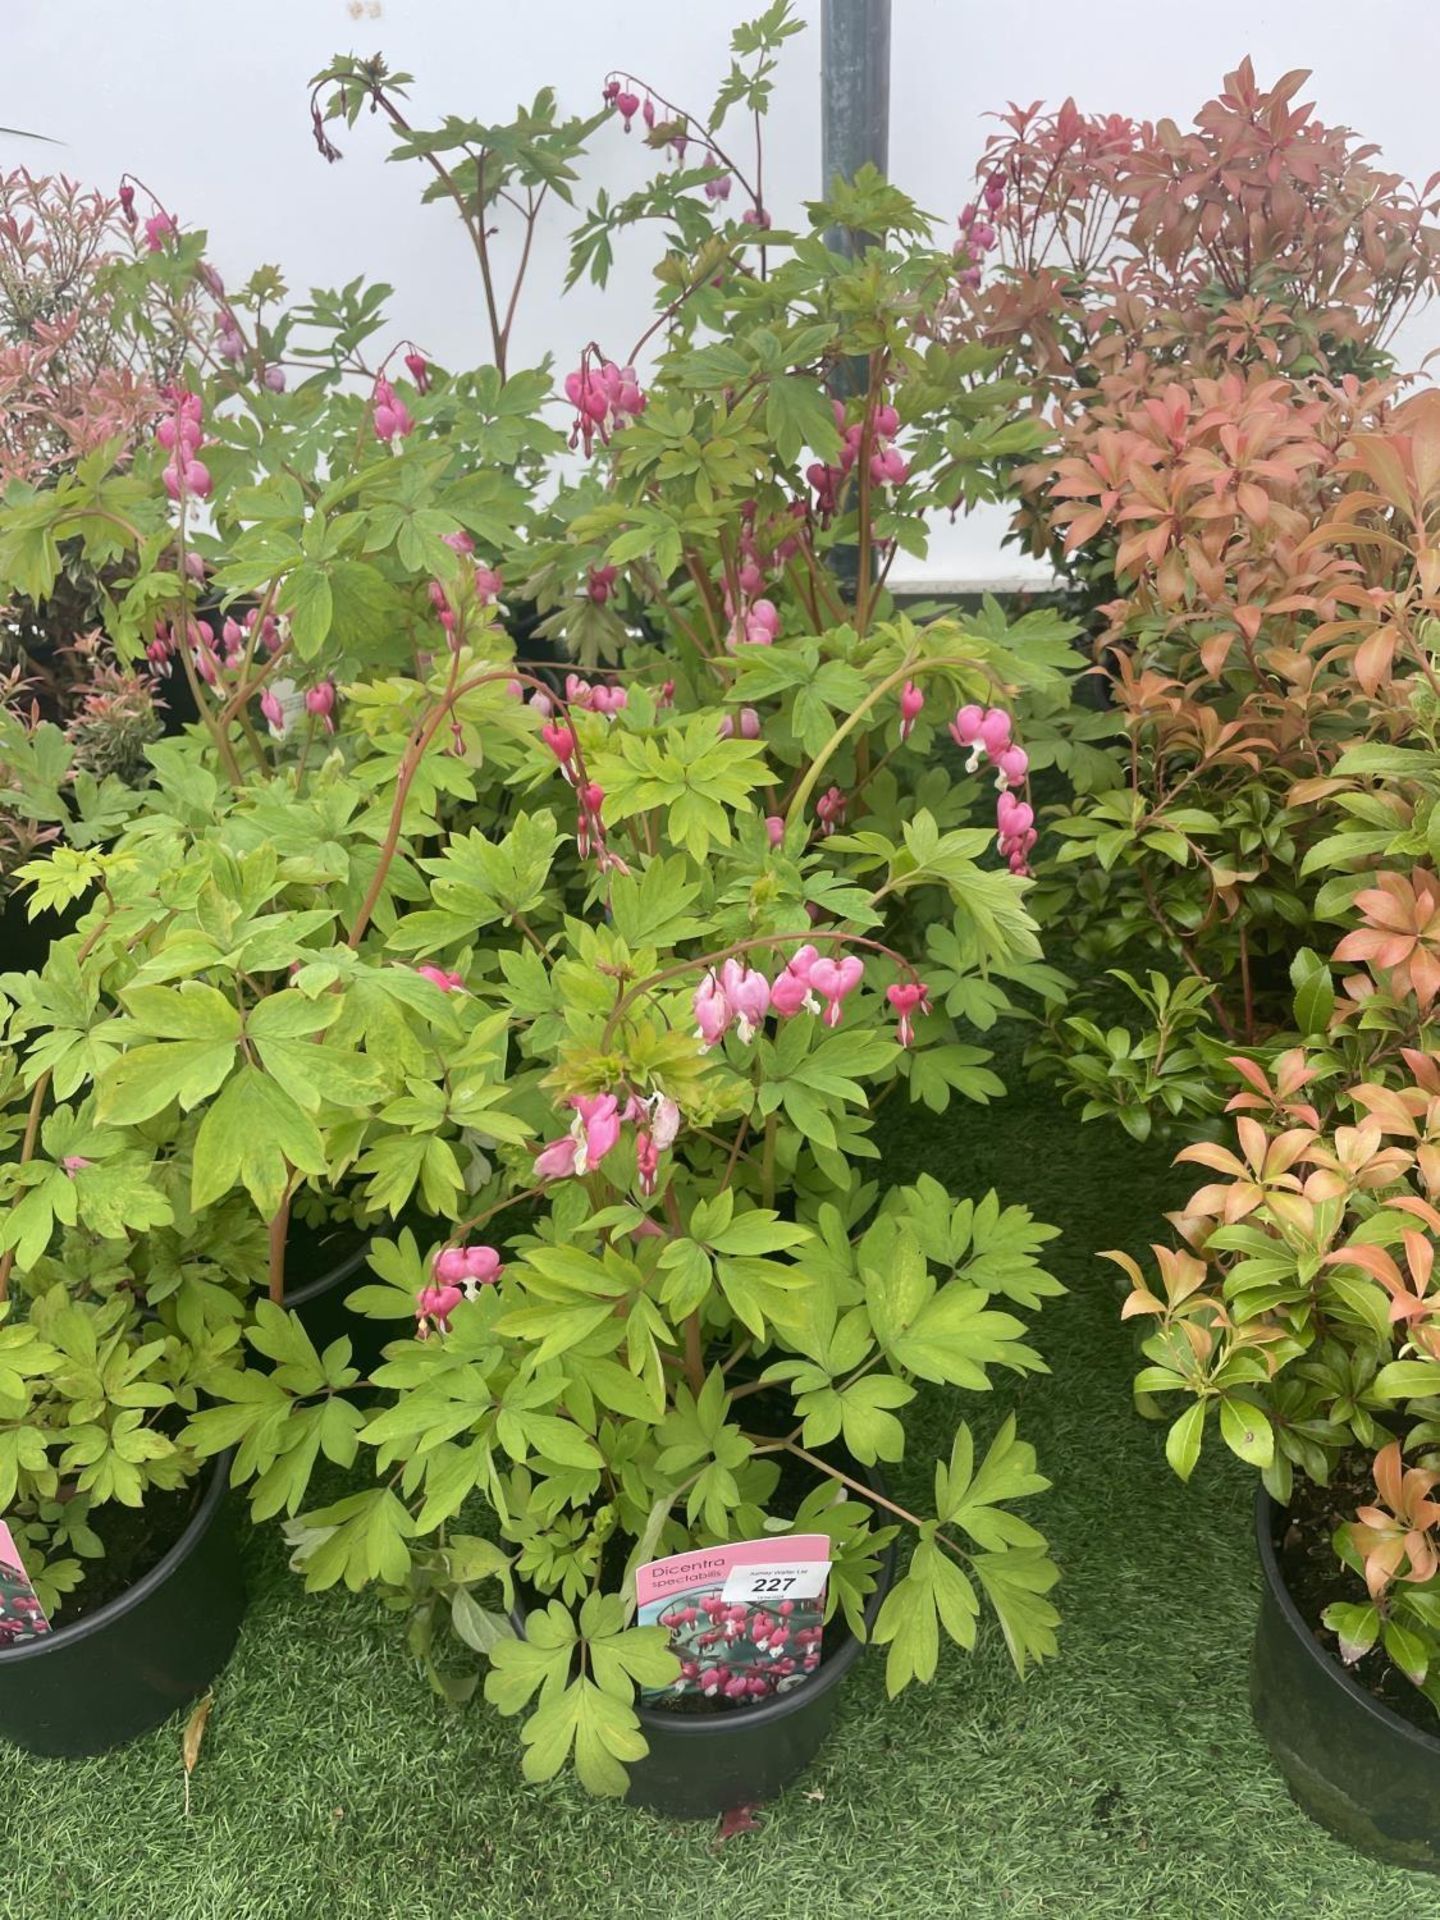 SIX DICENTRA SPECTABILIS BLEEDING HEART 50CM TALL IN 2 LTR POTS TO BE SOLD FOR THE SIX PLUS VAT